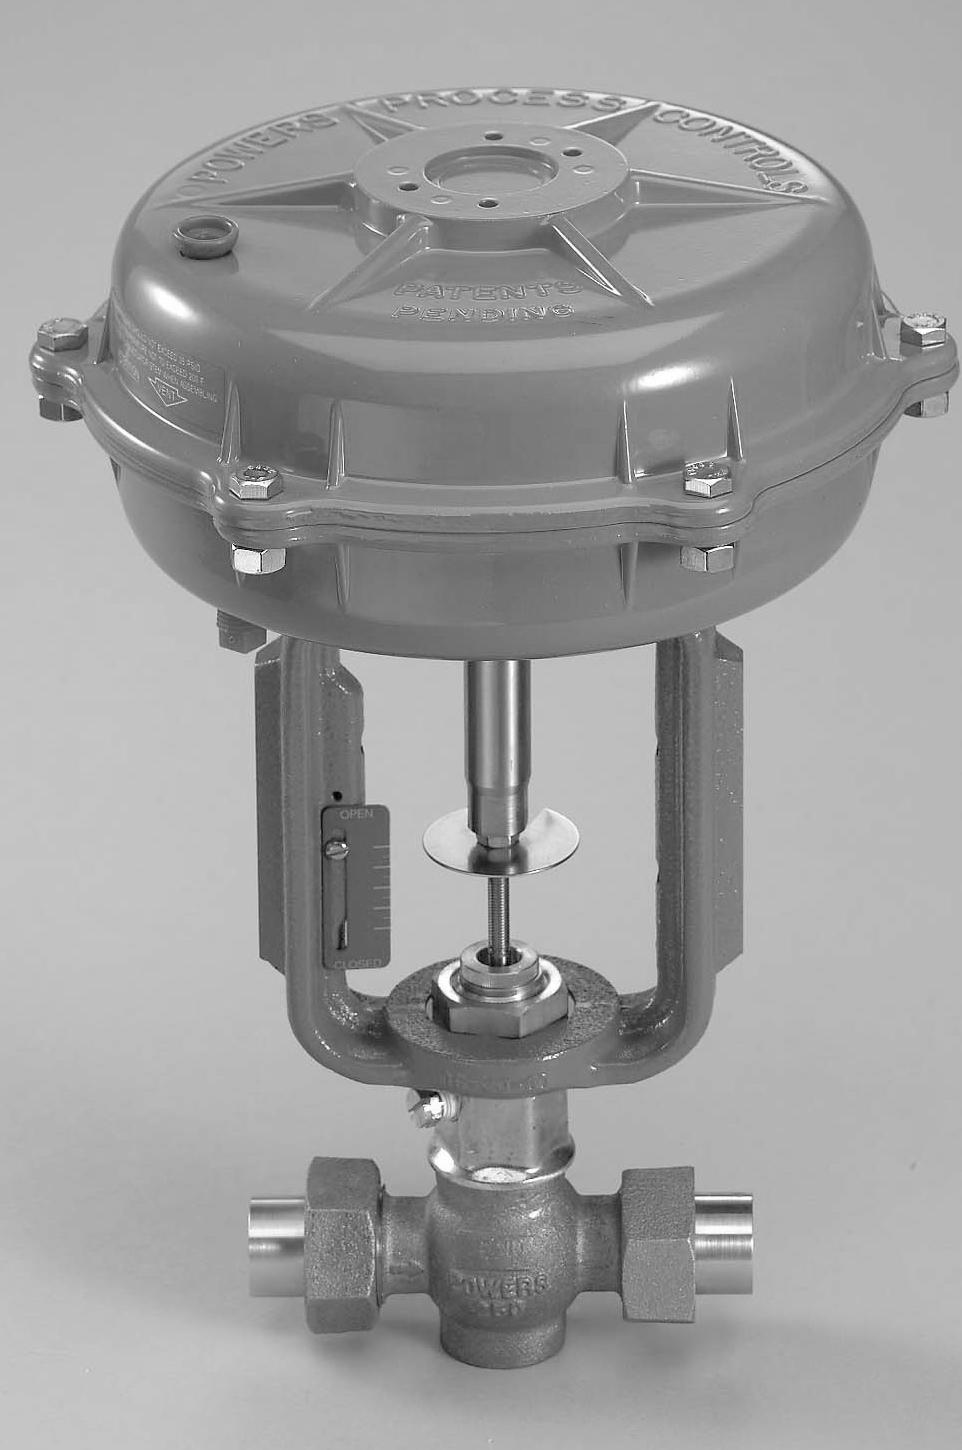 Page 8 TI593UBS FLOWRITE II DIMENSIONAL DATA SS PNEUMATIC DIAPHRAGM ACTUATOR Pneumatic Diaphragm Actuators Actuator* 46 A A 10 B 10-3/8 lbs.